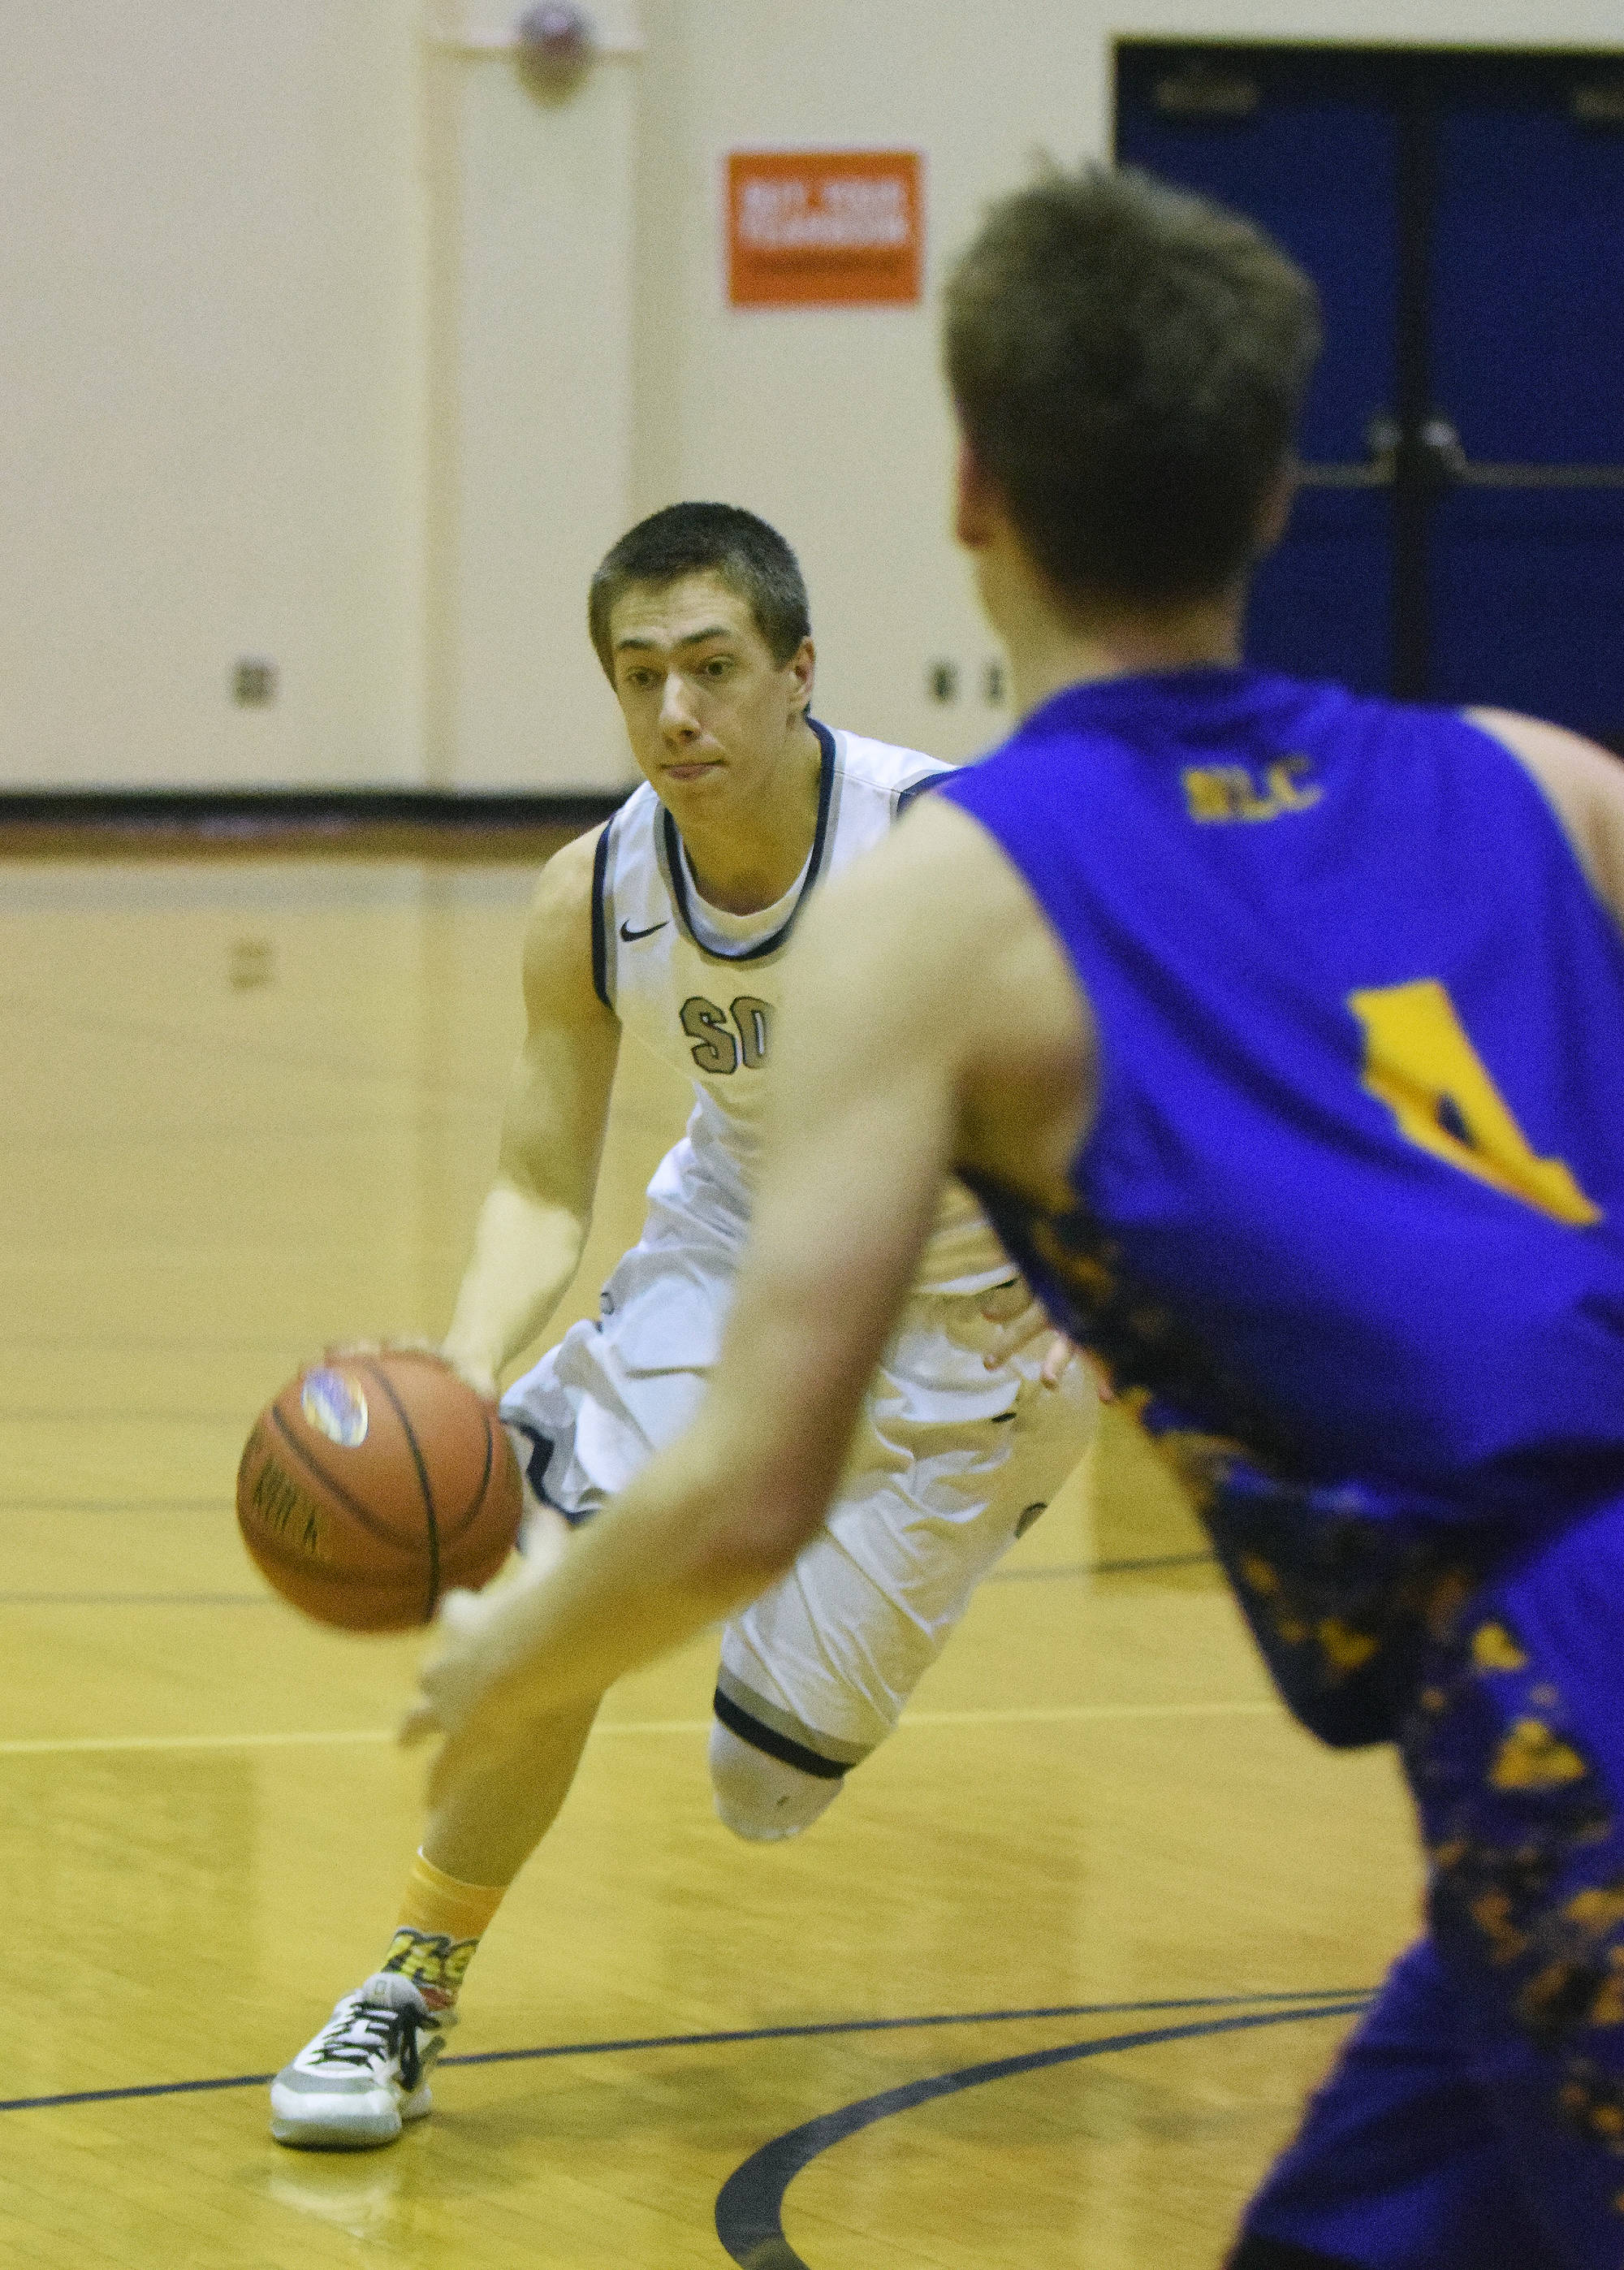 Soldotna sophomore Jersey Truesdell looks for an opening against the Kodiak defense Thursday night at Soldotna High School. (Photo by Joey Klecka/Peninsula Clarion)